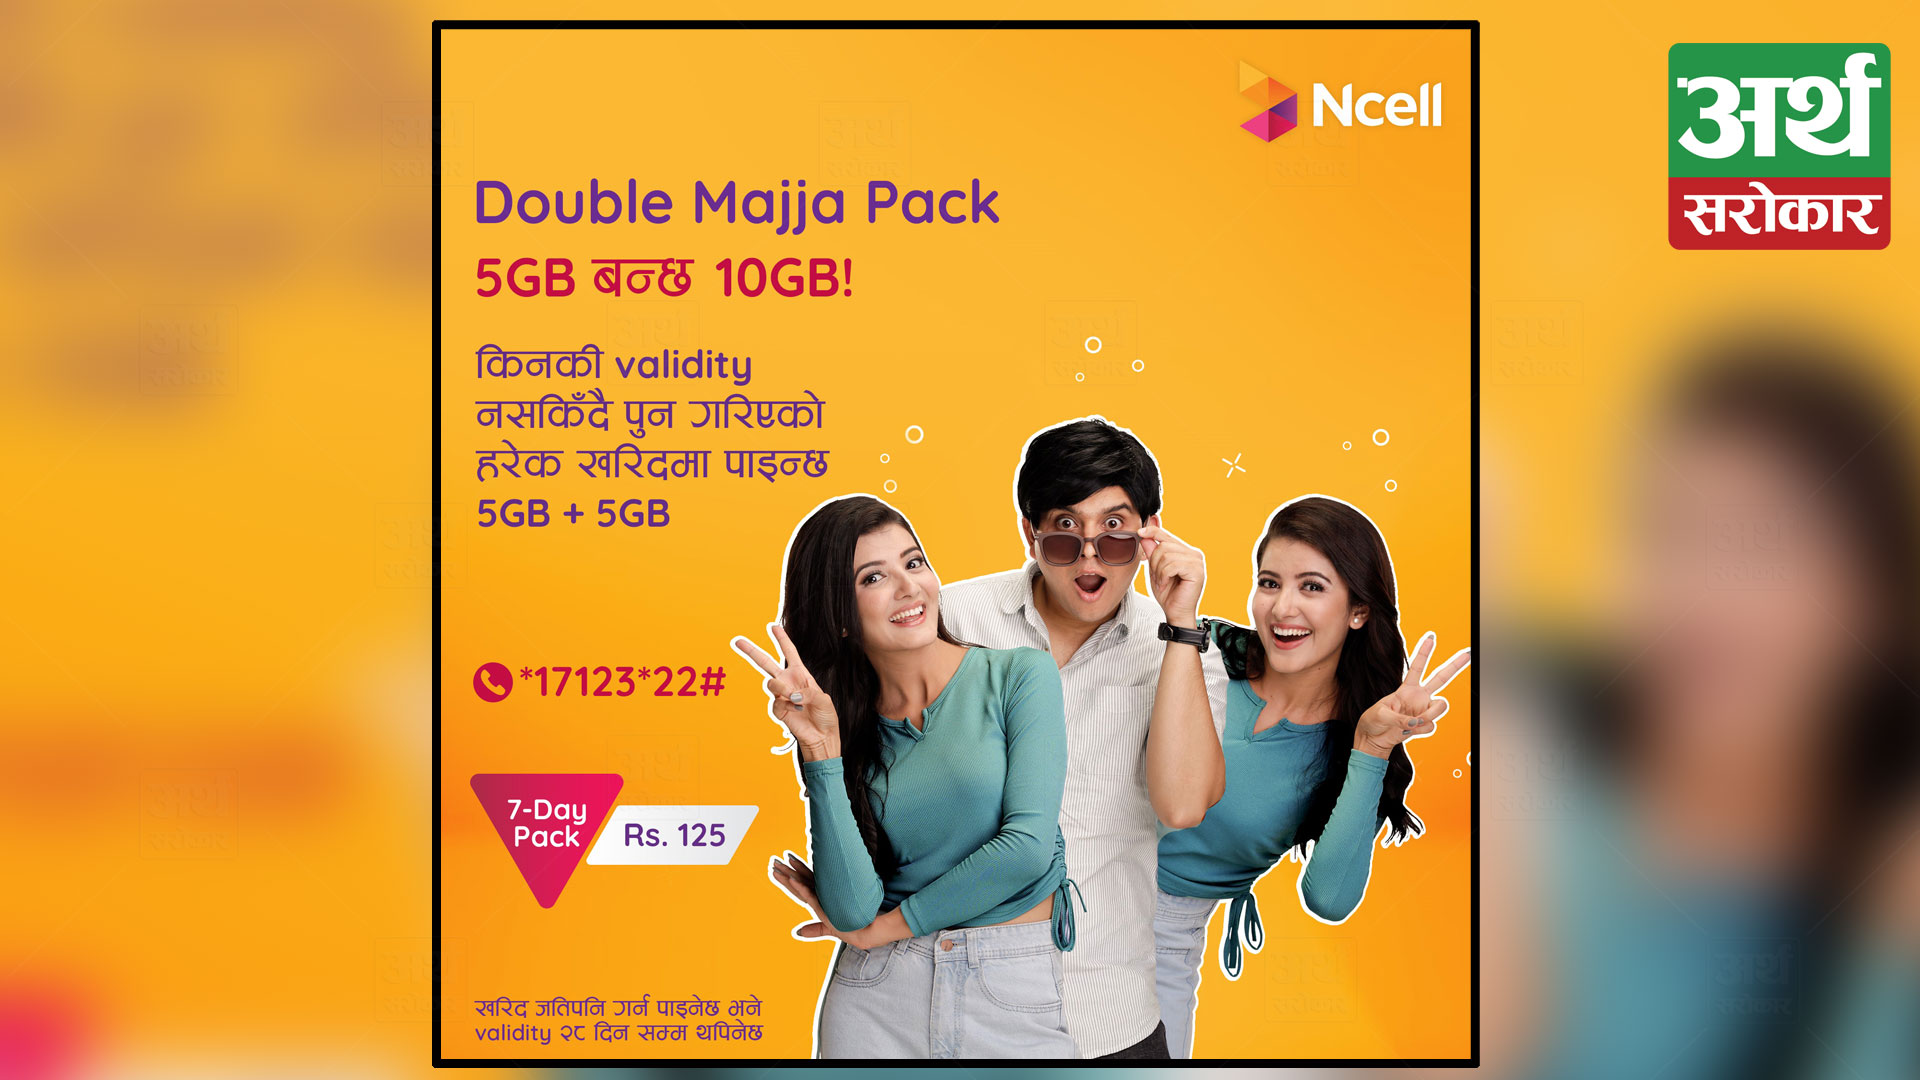 Ncell launches attractive ‘Double Majja Pack’